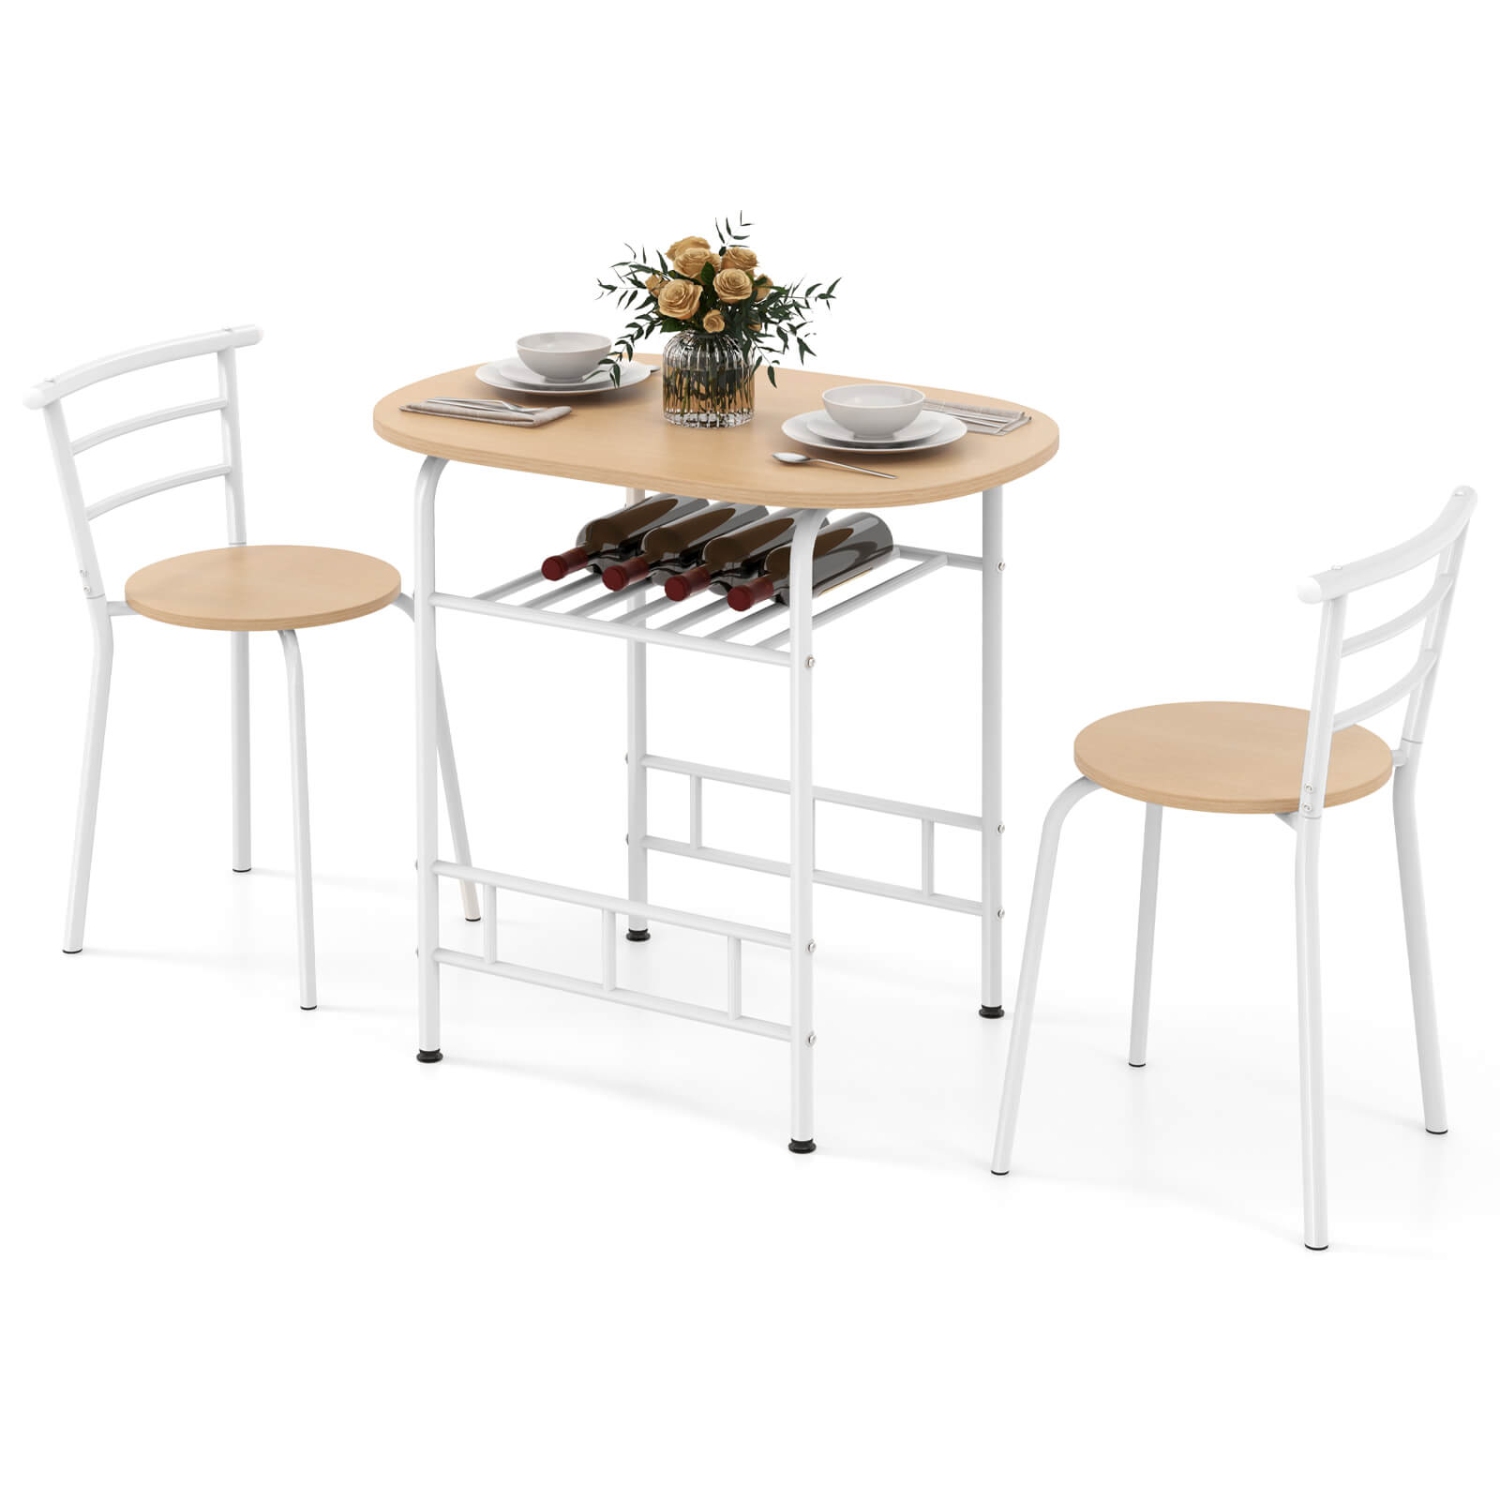 3 Pcs Bistro Dining Set Table 2 Chairs, Pub Style Dining Table 2 Chairs